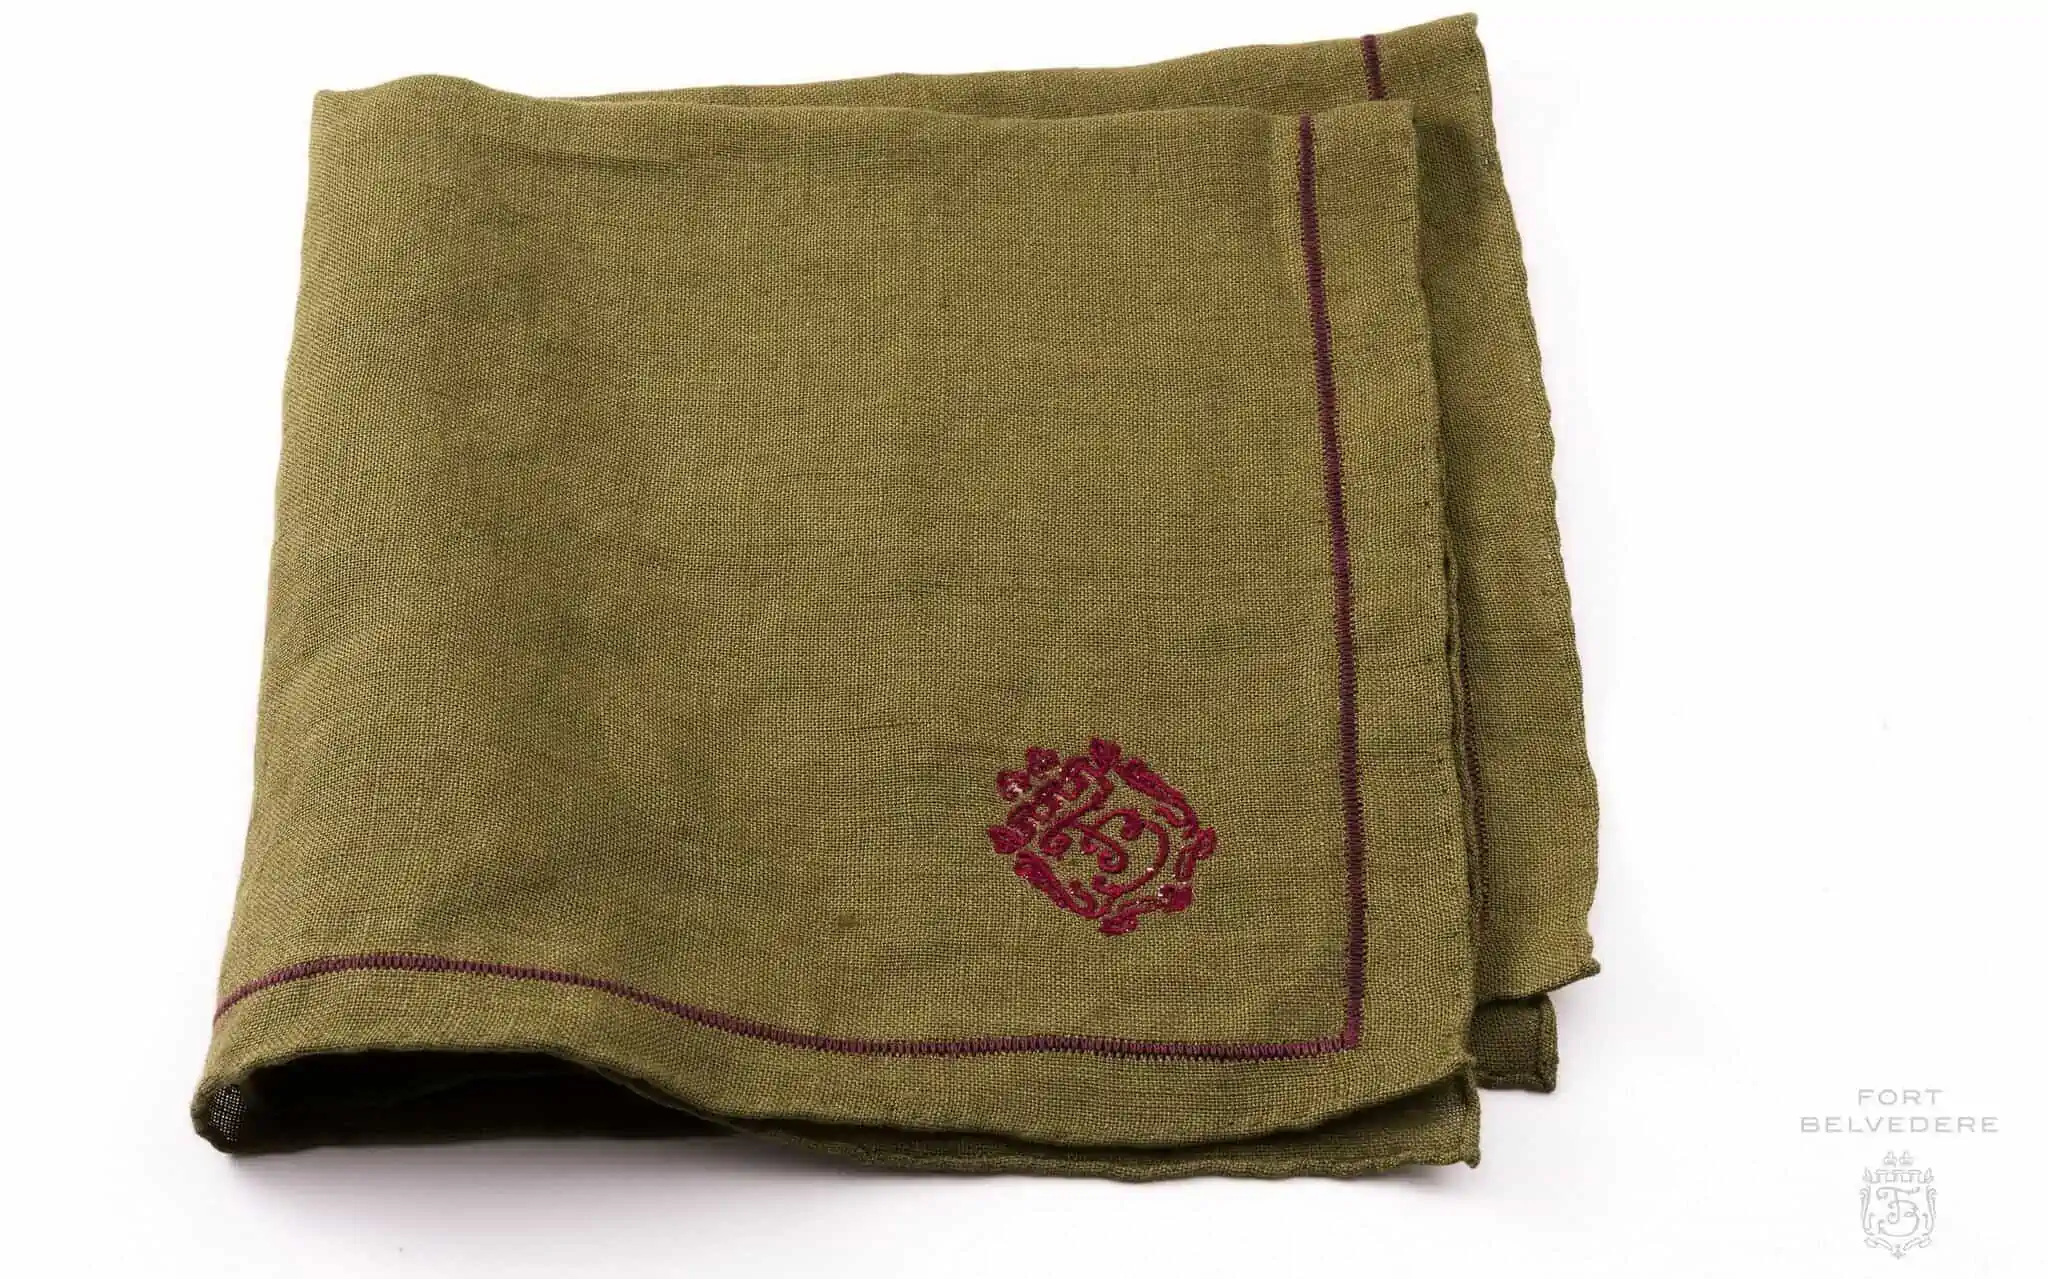 Olive Green Linen Pocket Square with Dark Brown Contrast Embroidery - Fort Belvedere